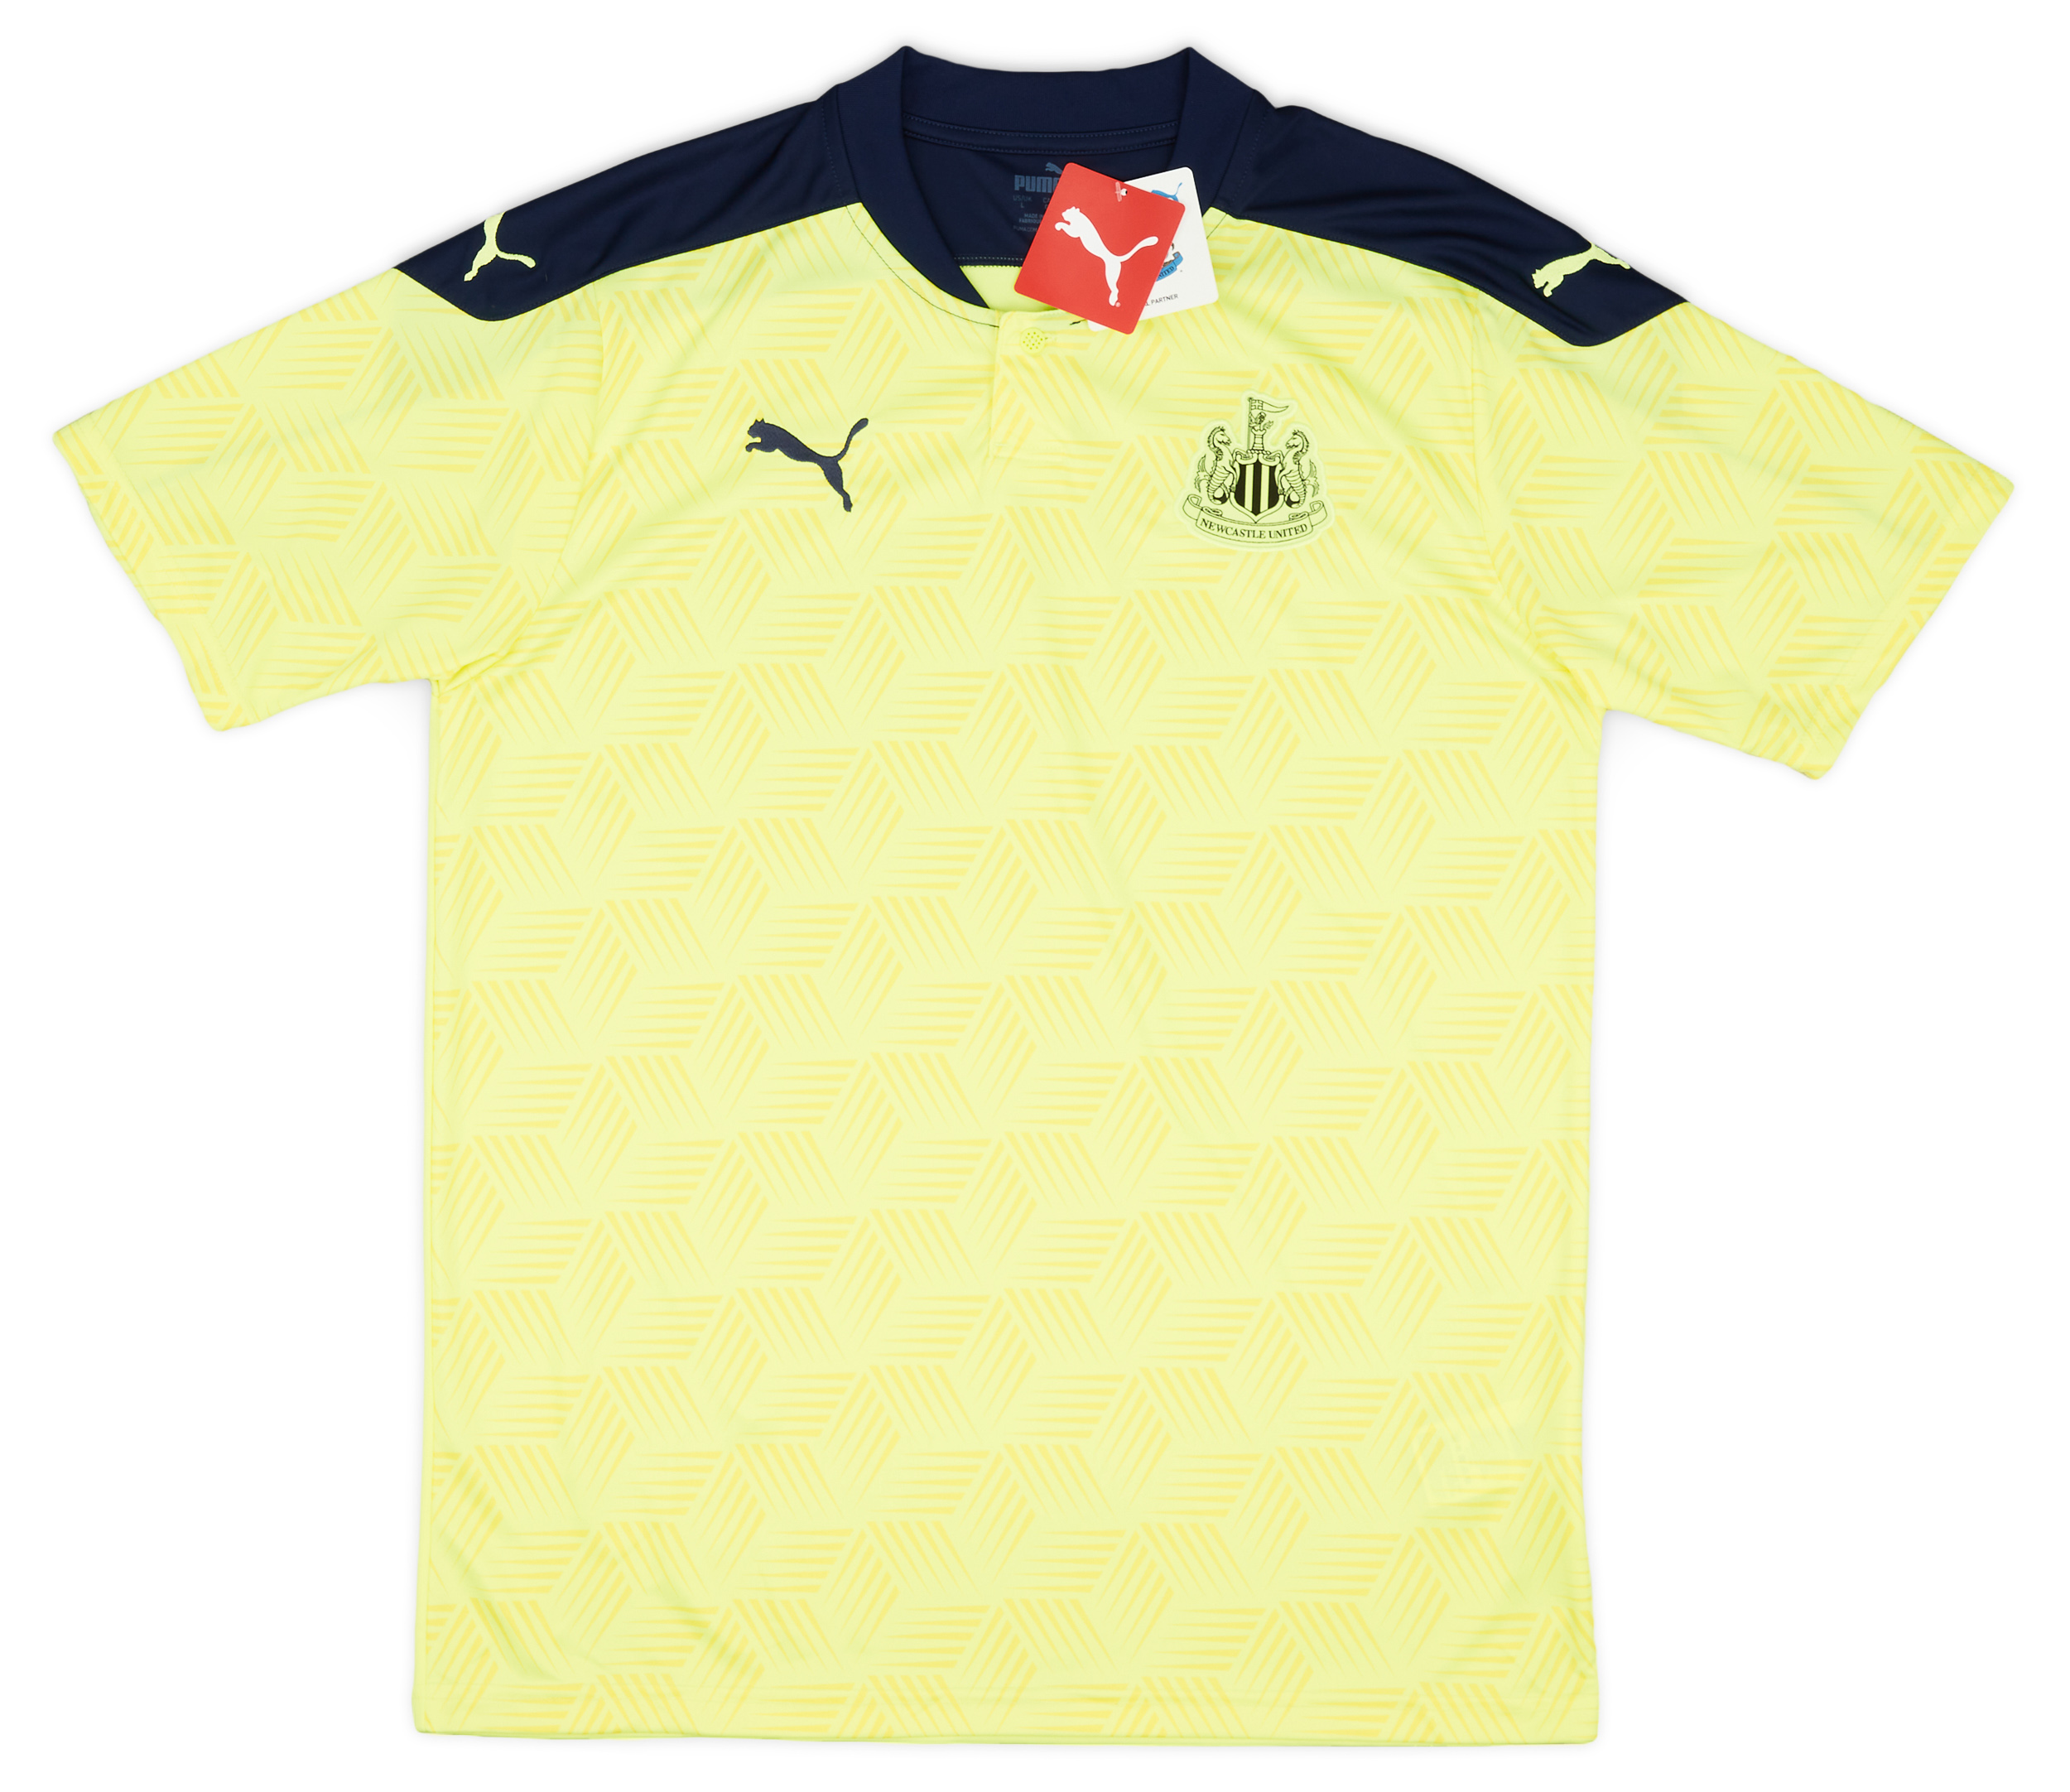 2020-21 Newcastle United Player Issue Away Shirt ()